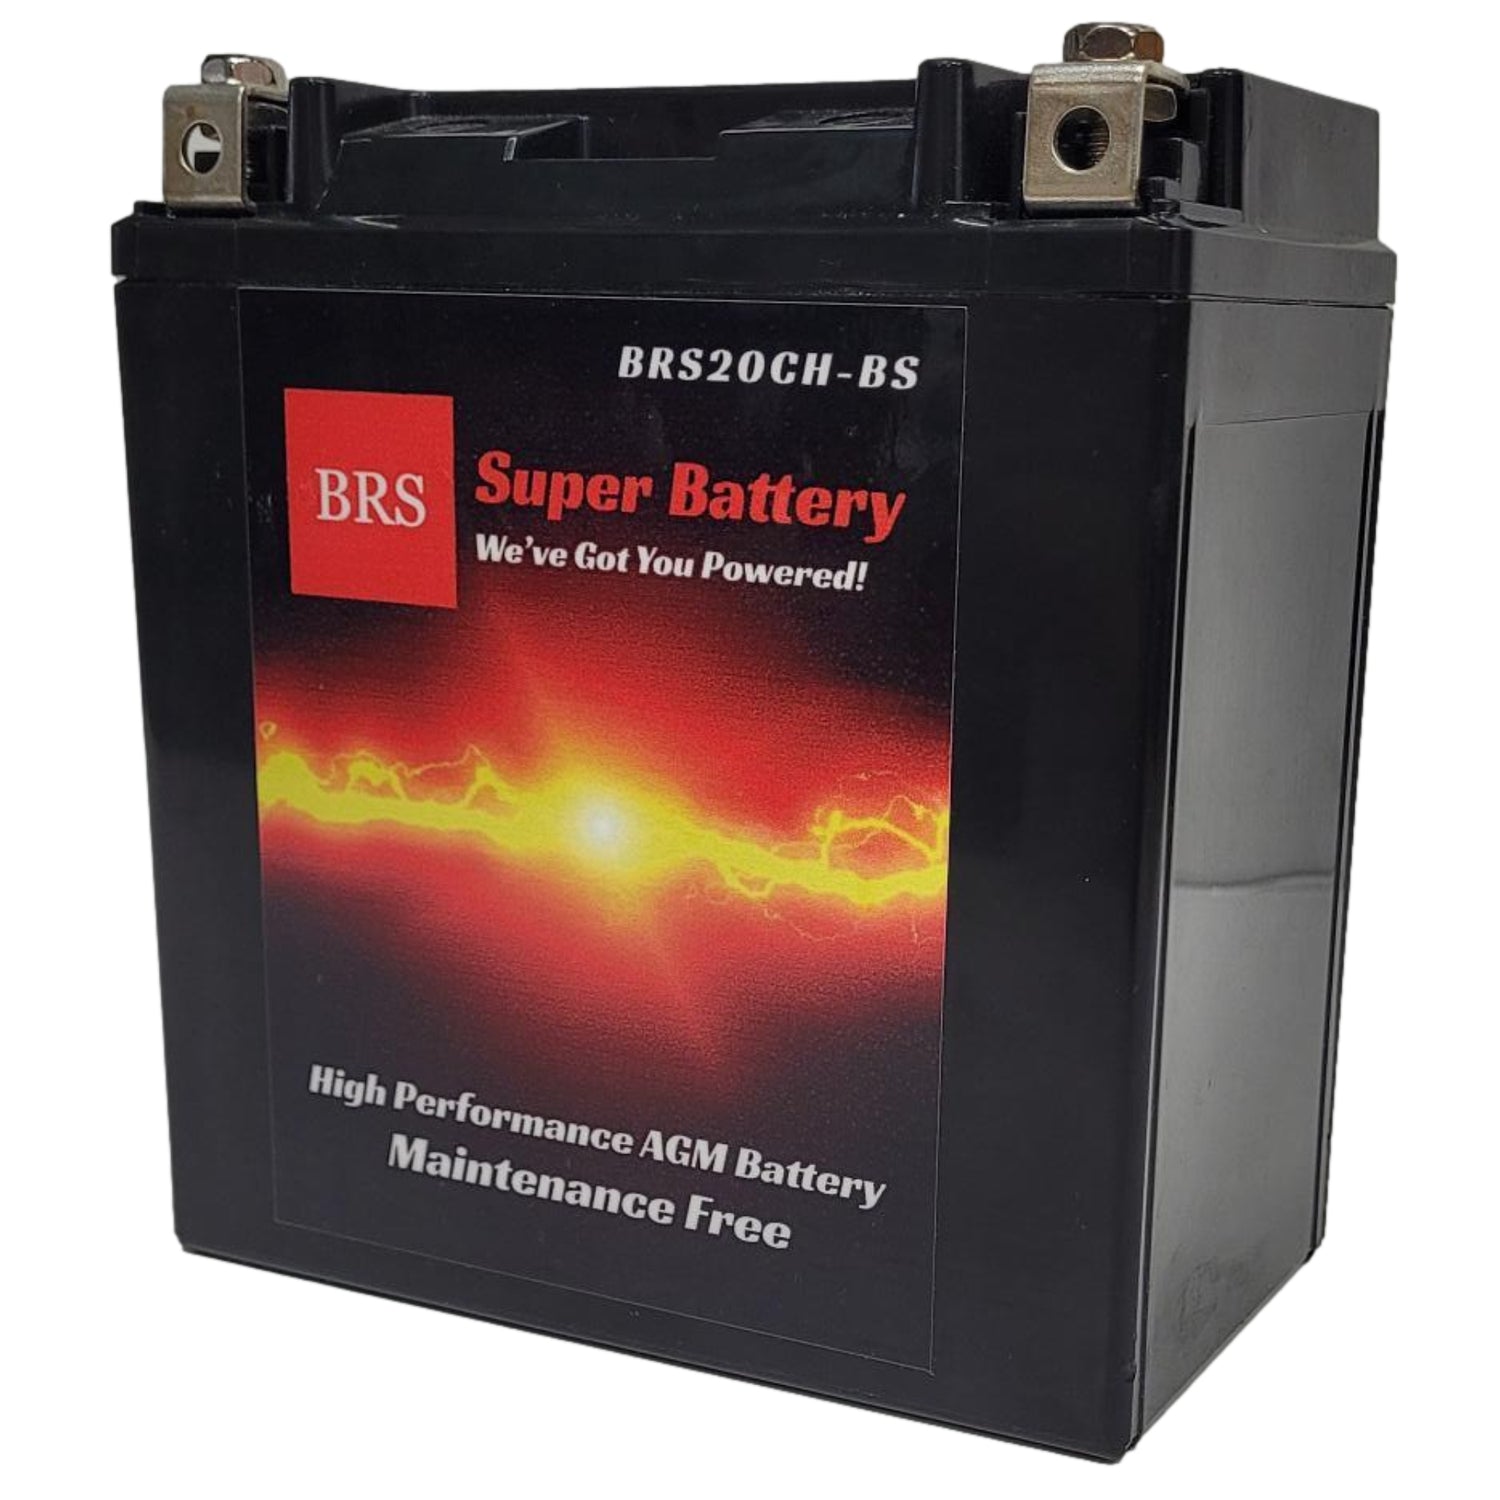 WPX20CH-BS 12v High Performance Sealed AGM PowerSport 2 Year Battery - BRS Super Battery